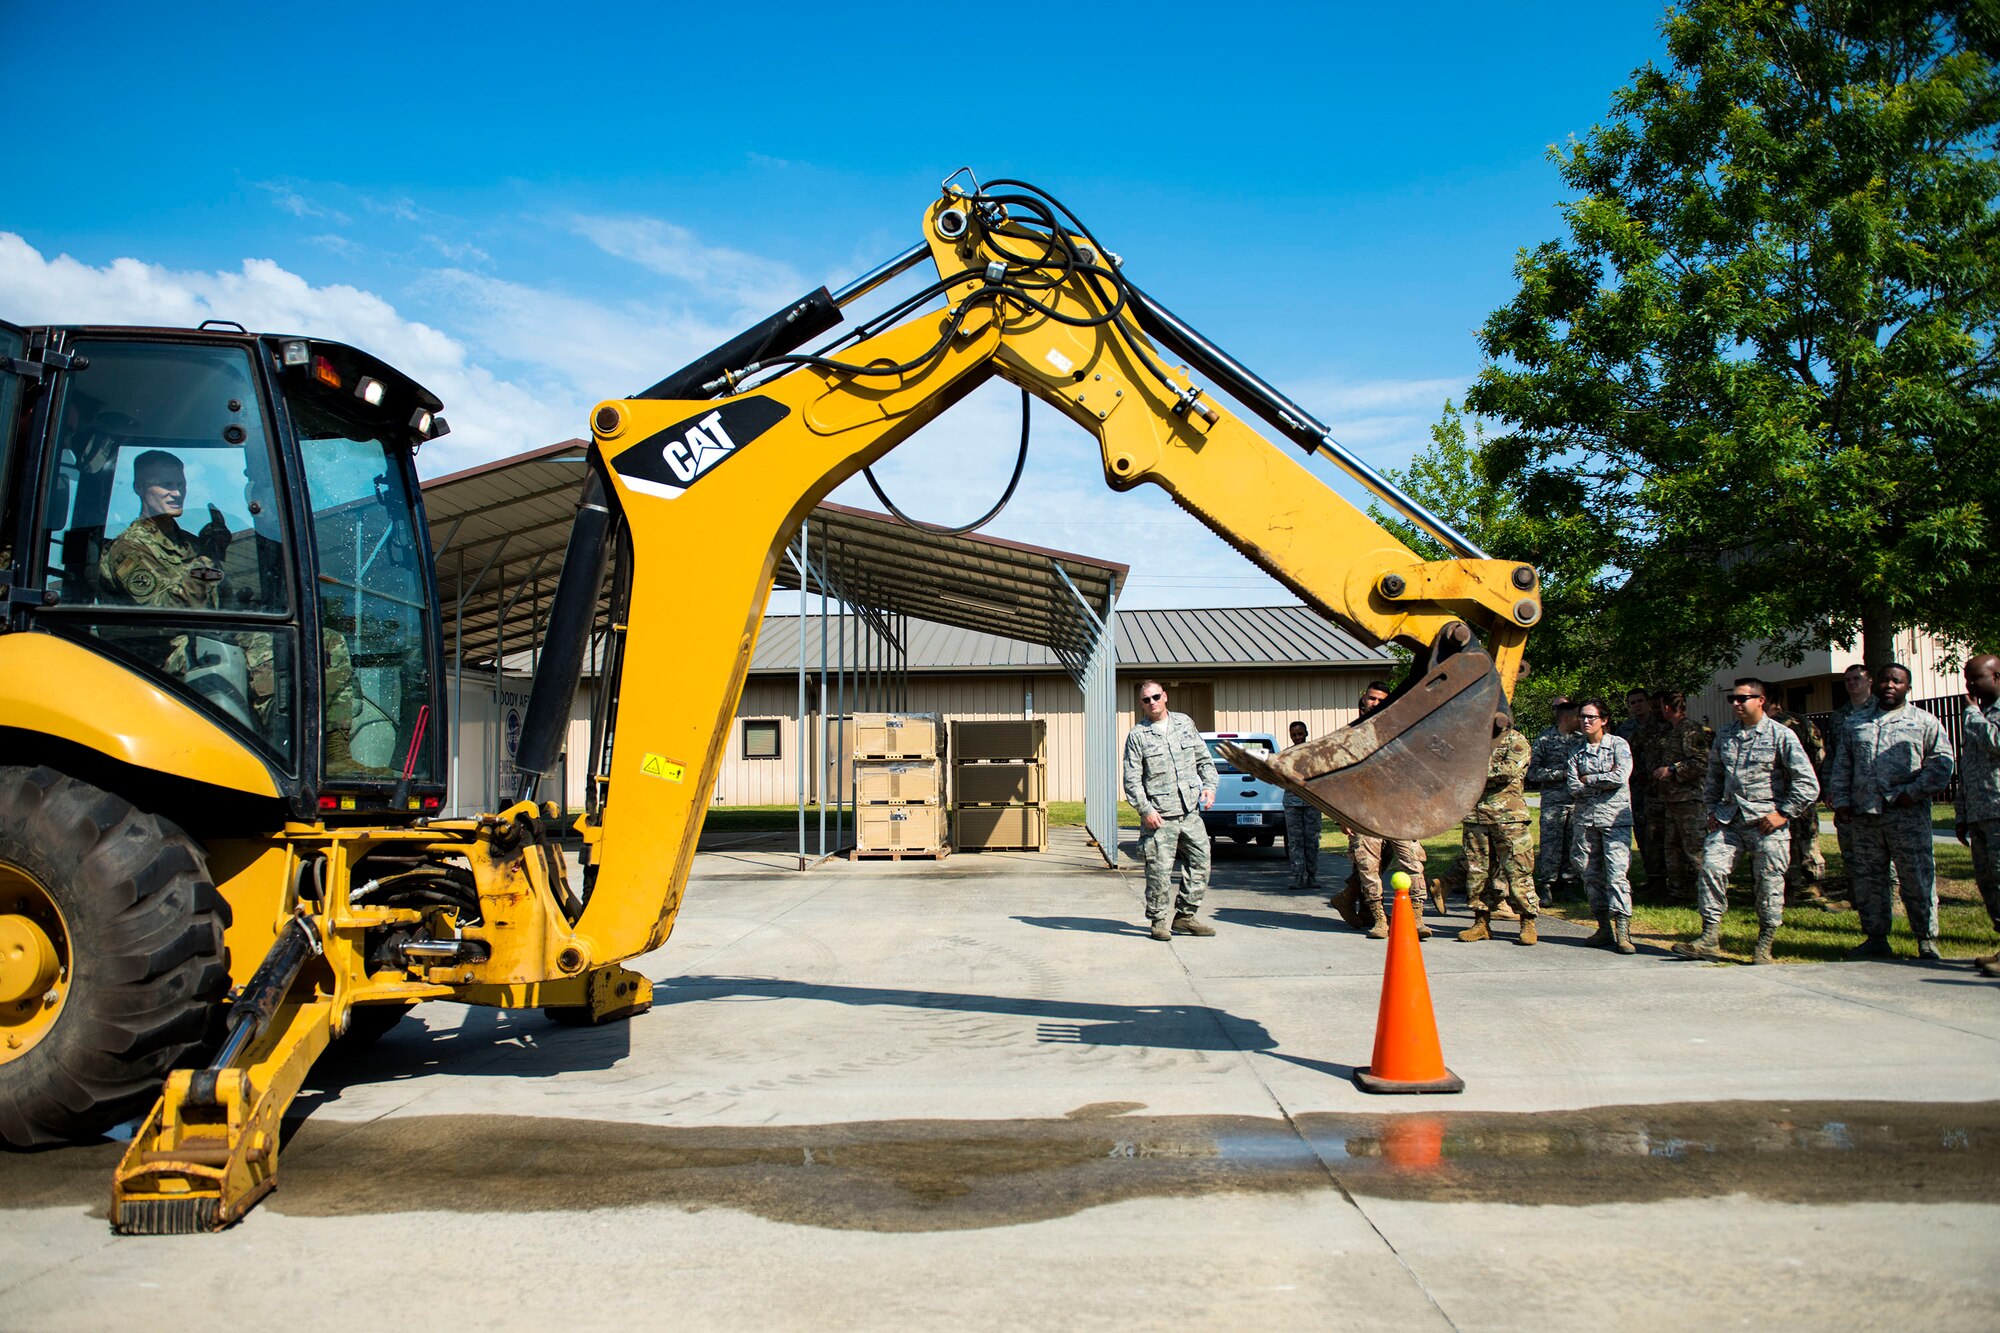 Col. Dee Jay Katzer, command engineer for Air Combat Command, operates a back hoe during a cone touch challenge during a squadron tour, May 22, 2019, at Moody Air Force Base, Ga. The challenge involved Katzer having to pick up a ball from the cone with a back hoe and then placing it back on the cone without it dropping. Katzer’s first visit to Moody consisted of a base tour, along with visiting various 23d Civil Engineer Squadron (CES) shops. He also observed Airmen from the 23d CES conduct airfield recovery training. (U.S. Air Force photo by Senior Airman Erick Requadt)